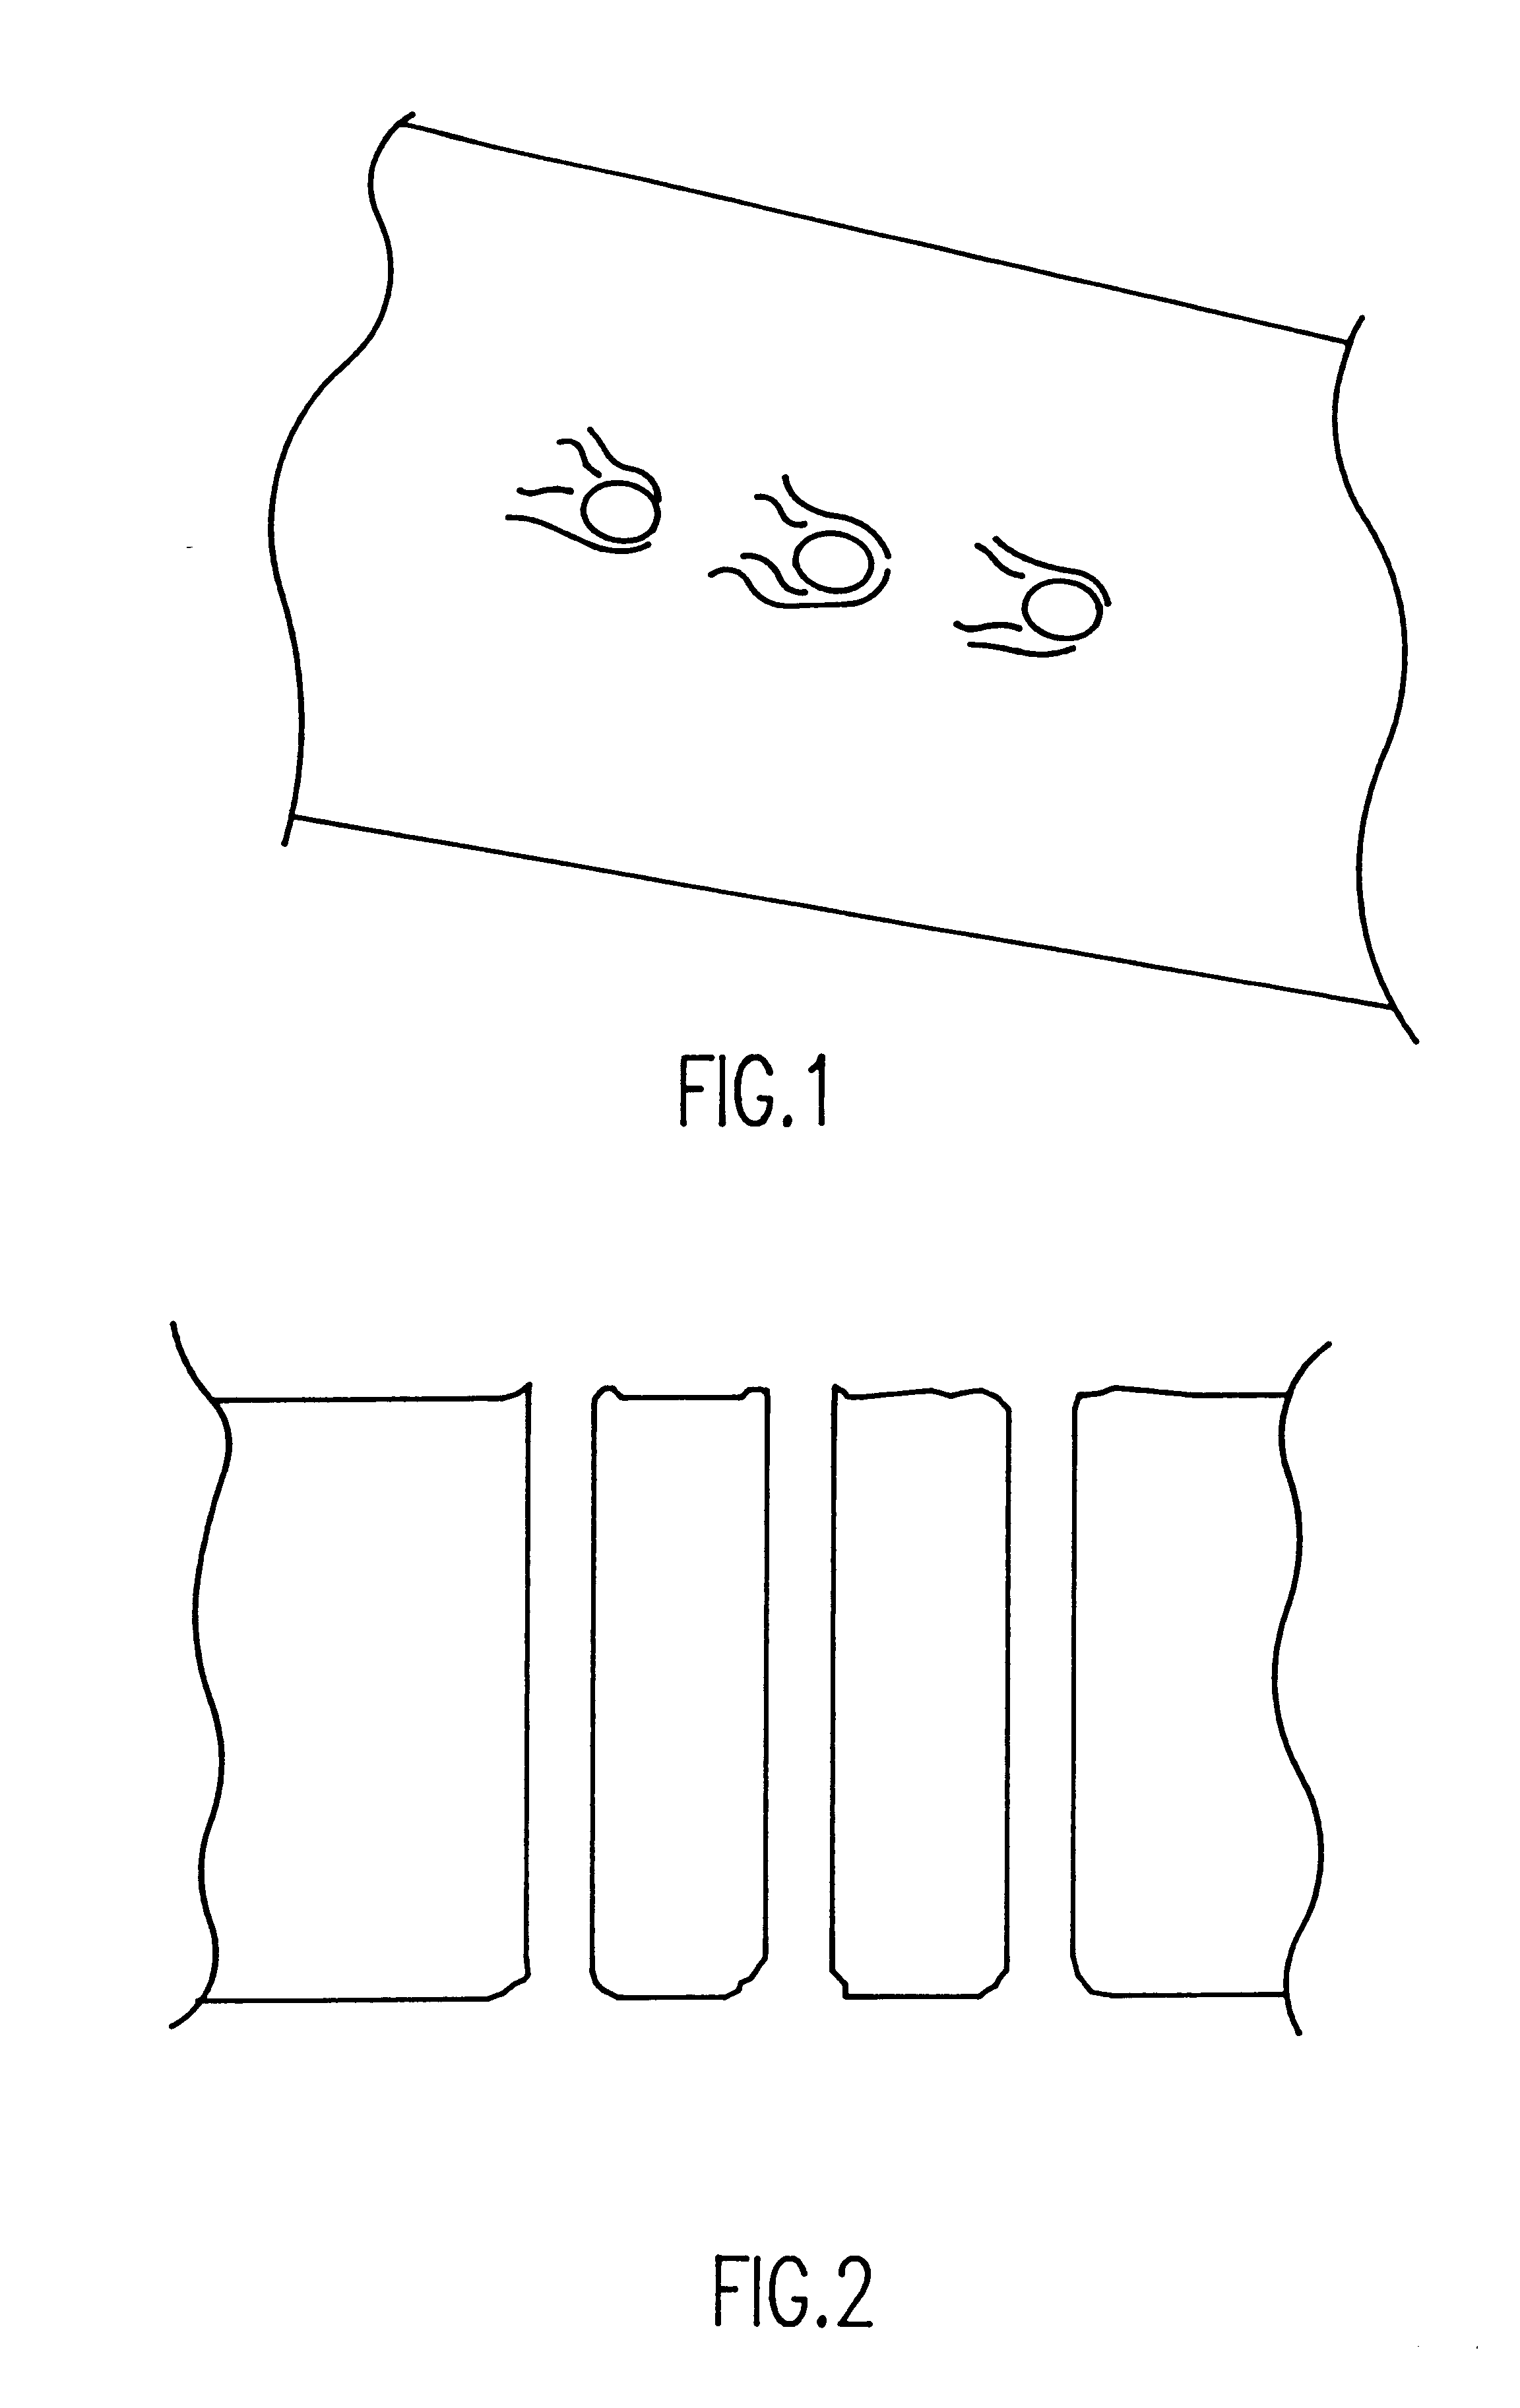 High density integrated circuit packaging with chip stacking and via interconnections